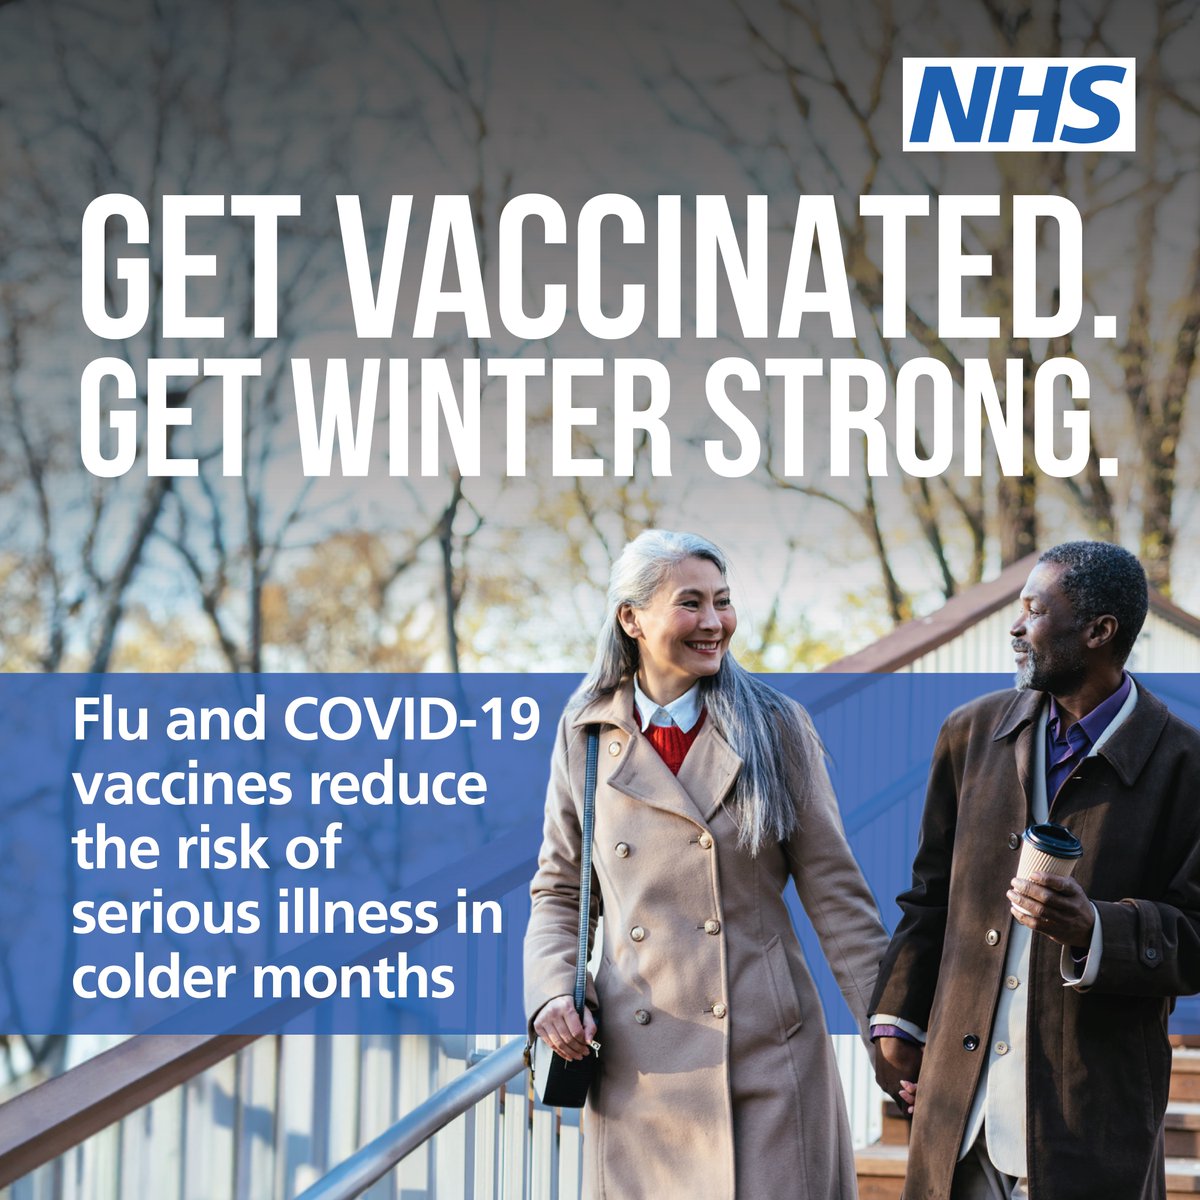 For some, flu or COVID-19 can be very dangerous and even life-threatening. Flu and COVID-19 vaccines reduce the risk of serious illness in colder months. Find out if you’re eligible and book now. ➡️ ow.ly/CI3M50PXuGw